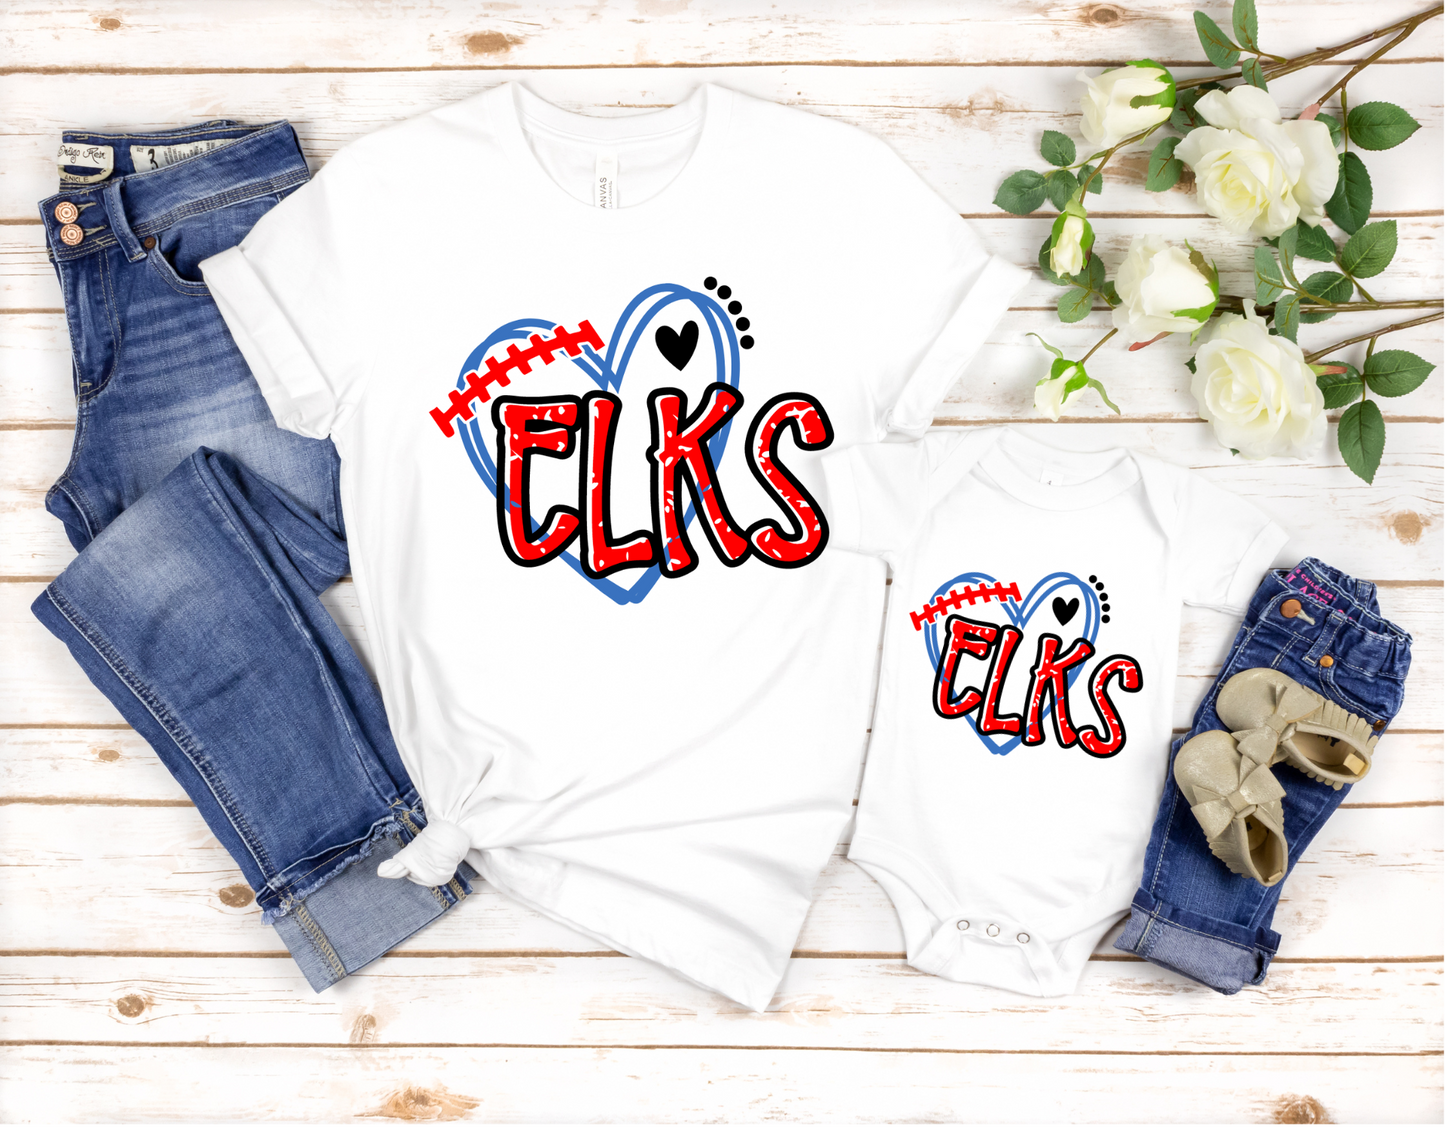 Elks with Heart Completed Shirt